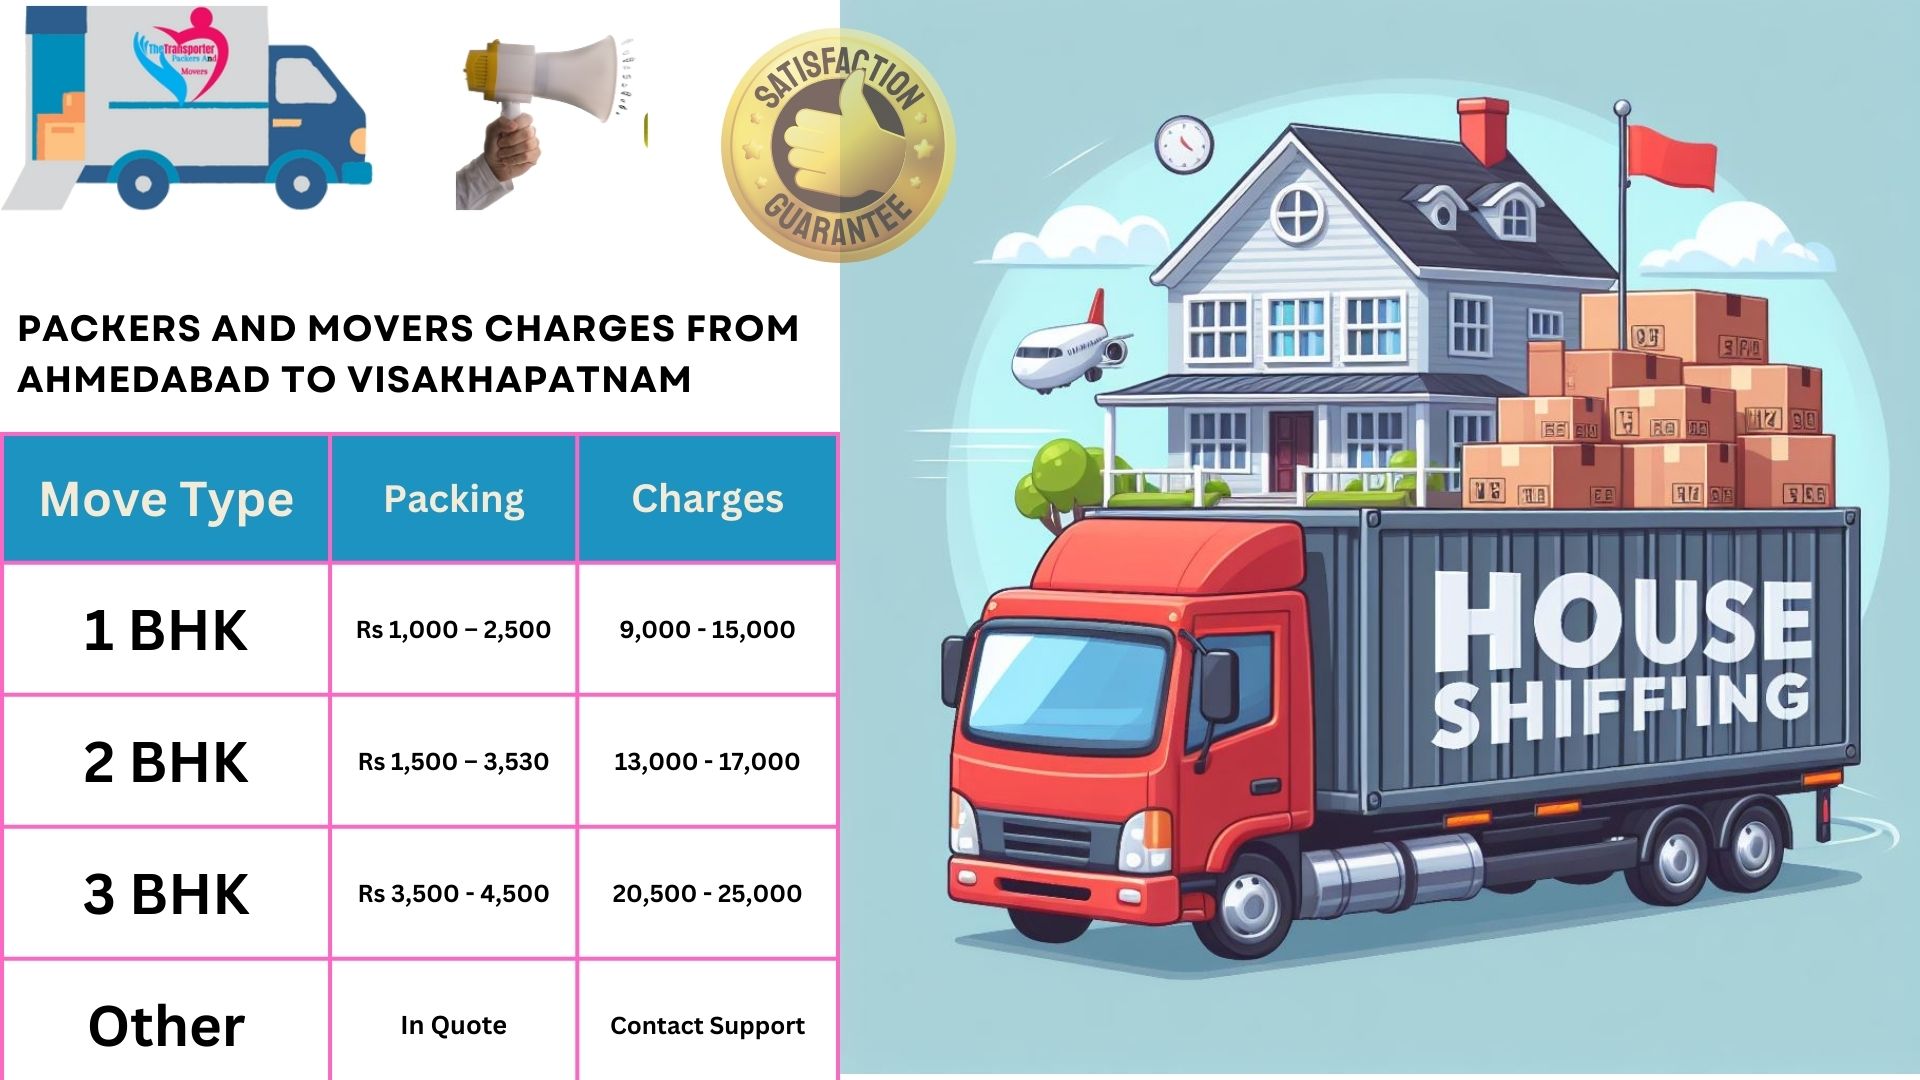 Your household goods shifting from Ahmedabad to Visakhapatnam